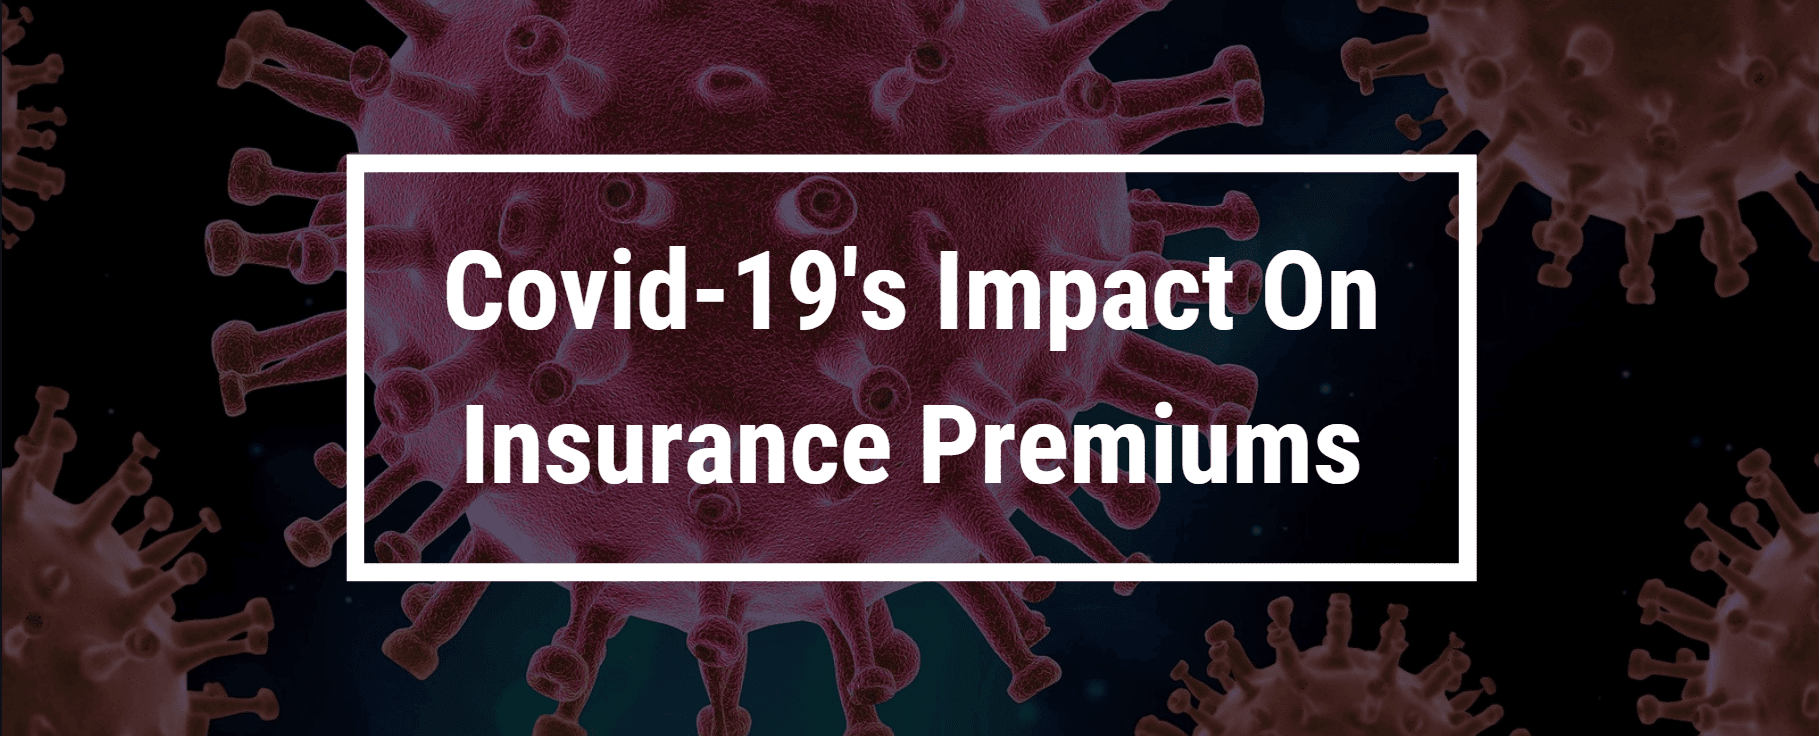 Covid 19's impact on insurance premiums.